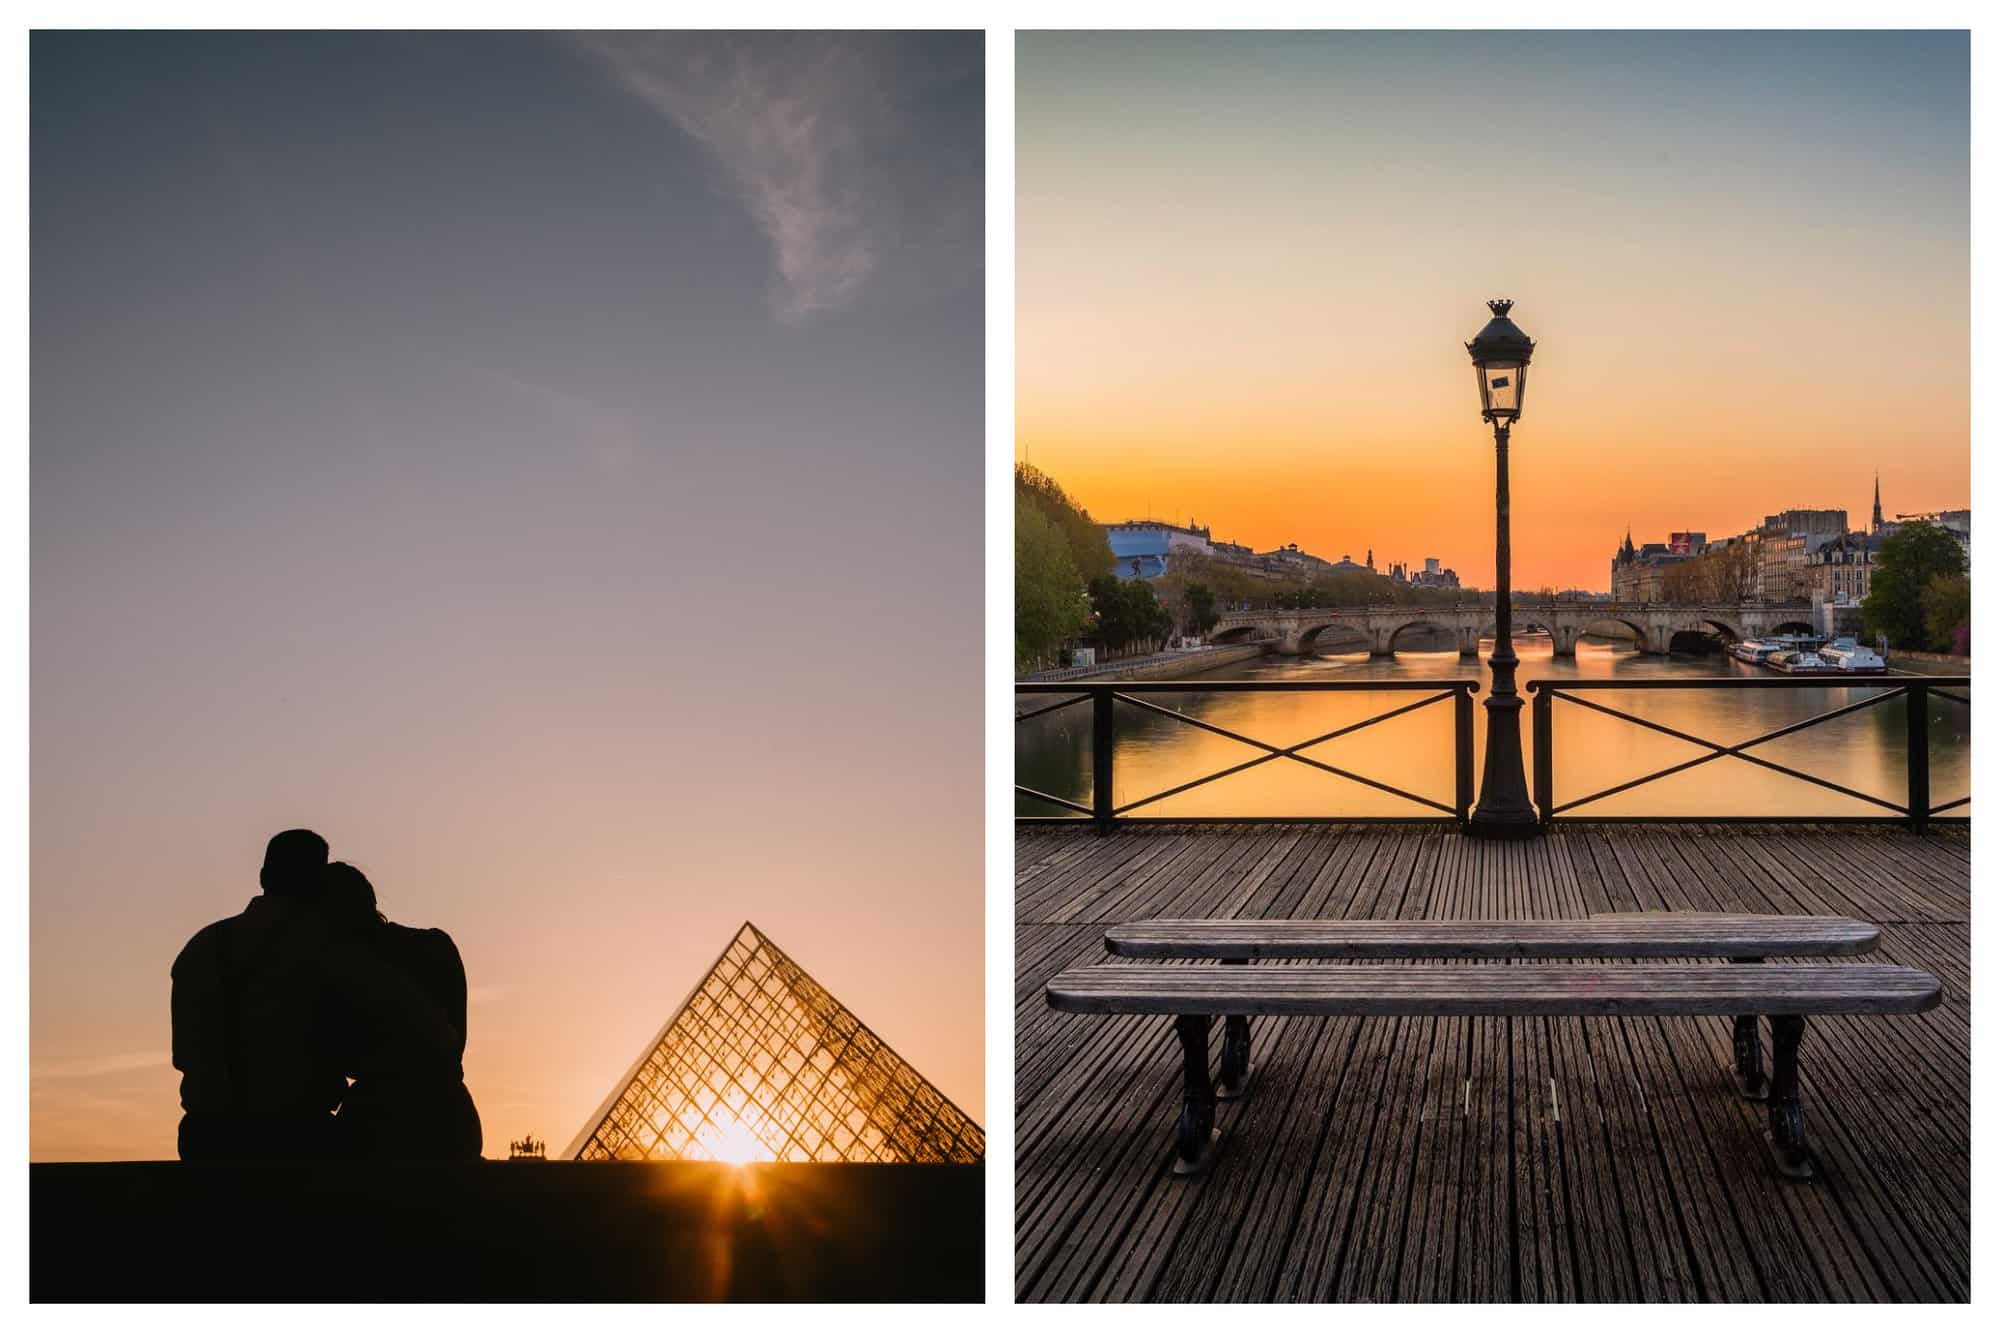 Left: A picture of a couple cuddling at sunset at the Louvre, with the museums glass pyramid in the background.  Right: a picture of sunset in Paris taken from a wooden bridge crossing the Seine. 